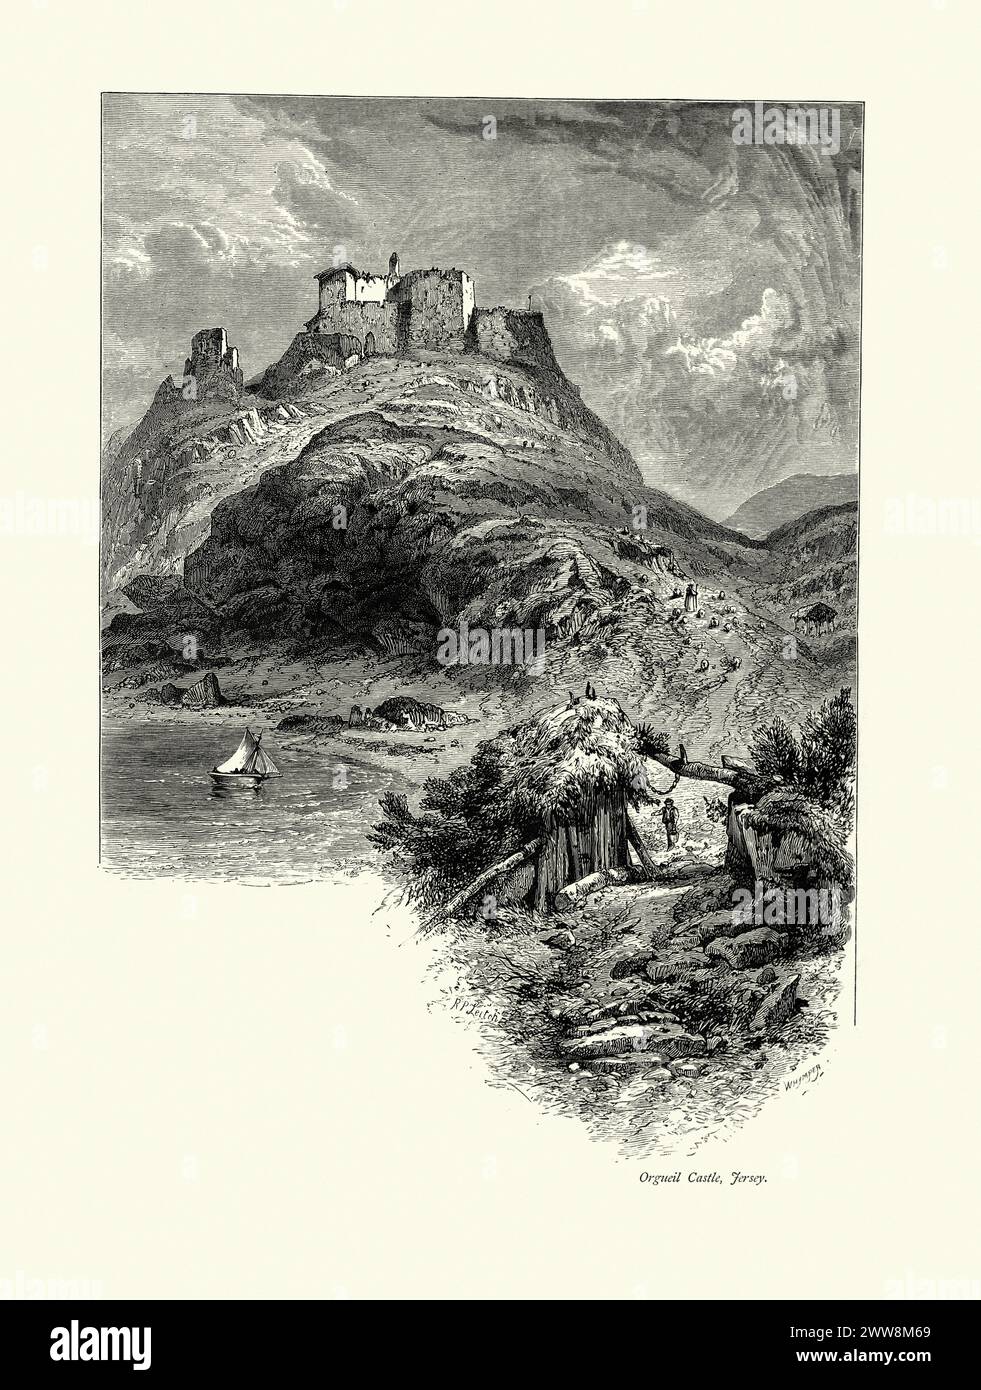 Vintage illustration of Orgueil Castle, Jersey, 19th Century Mont Orgueil is a castle in Jersey that overlooks the harbour of Gorey. It is also called Gorey Castle by English-speakers, and lé Vièr Châté by Jèrriais-speakers. The site had been fortified in the prehistoric period, but the construction of the castle was undertaken following the division of the Duchy of Normandy in 1204. The castle was first mentioned in 1212. Stock Photo